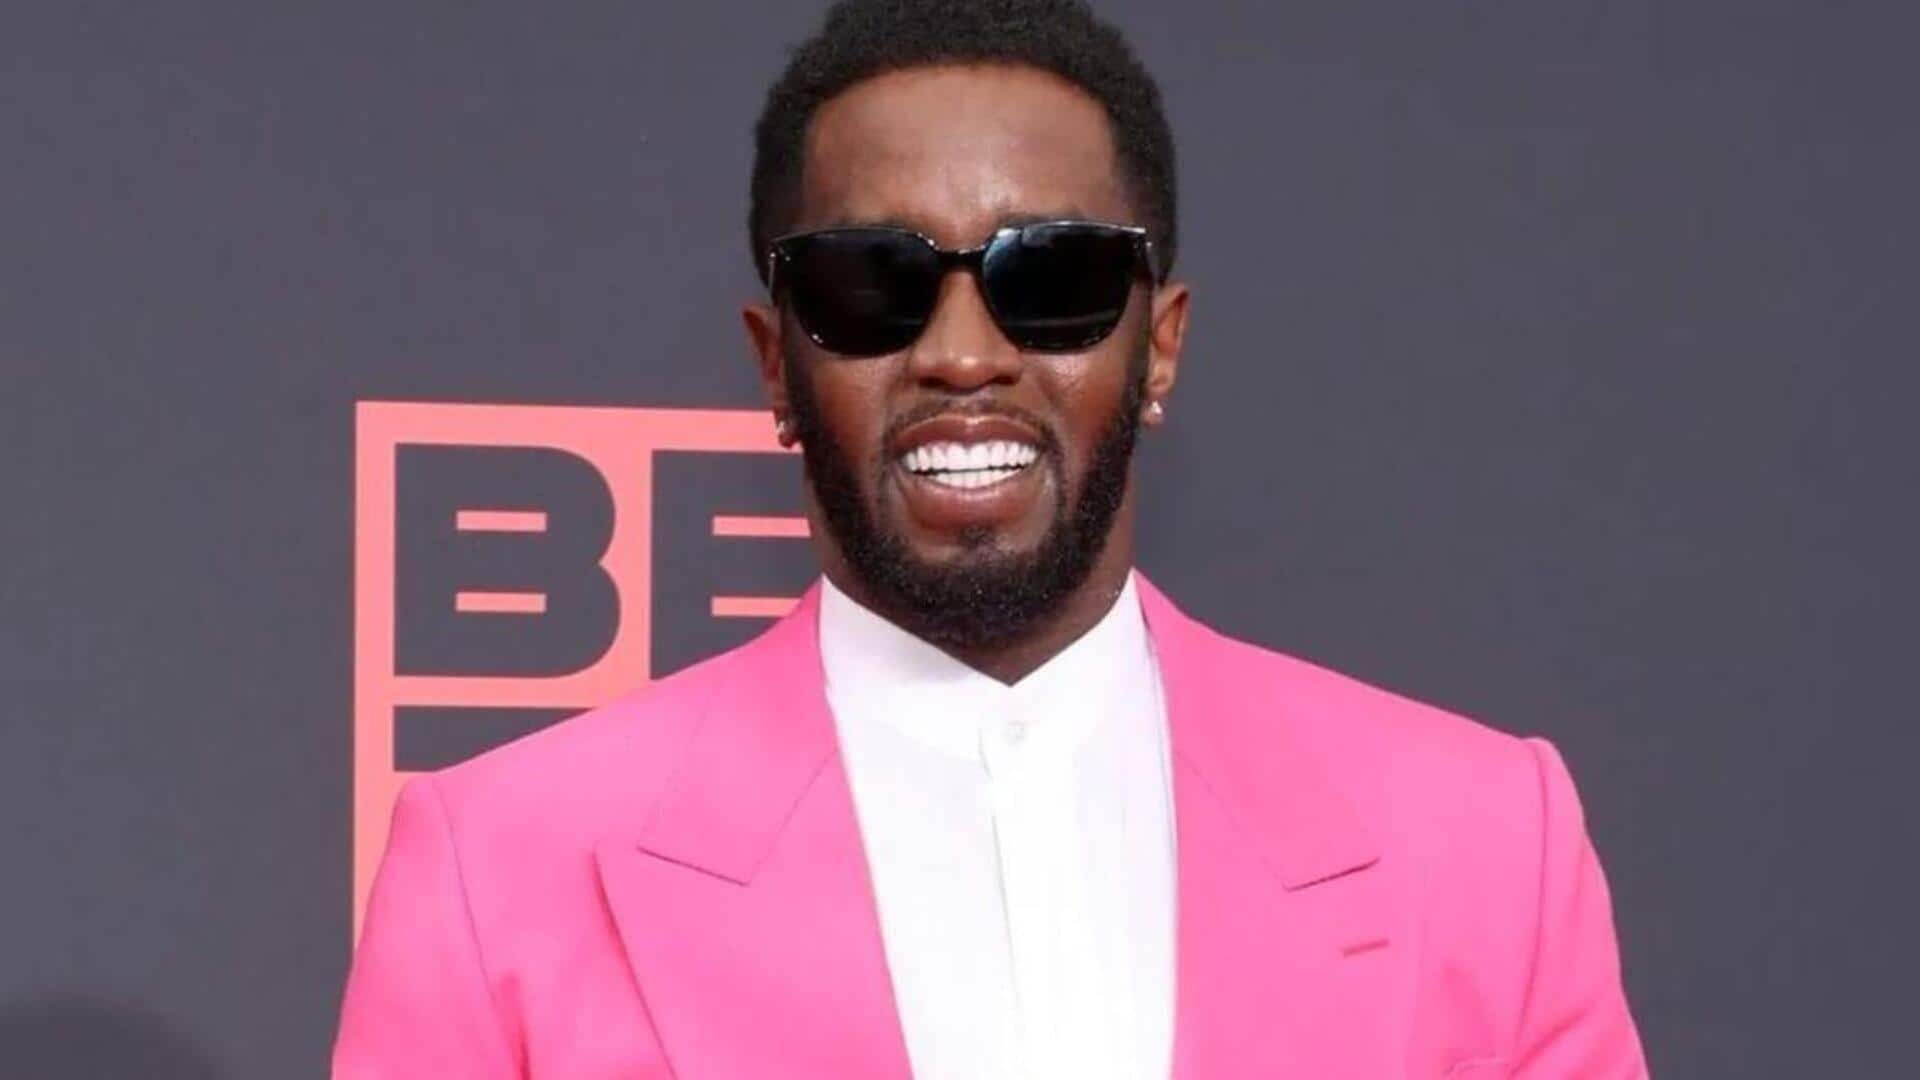 New lawsuit filed against Diddy for sexually assaulting, drugging model